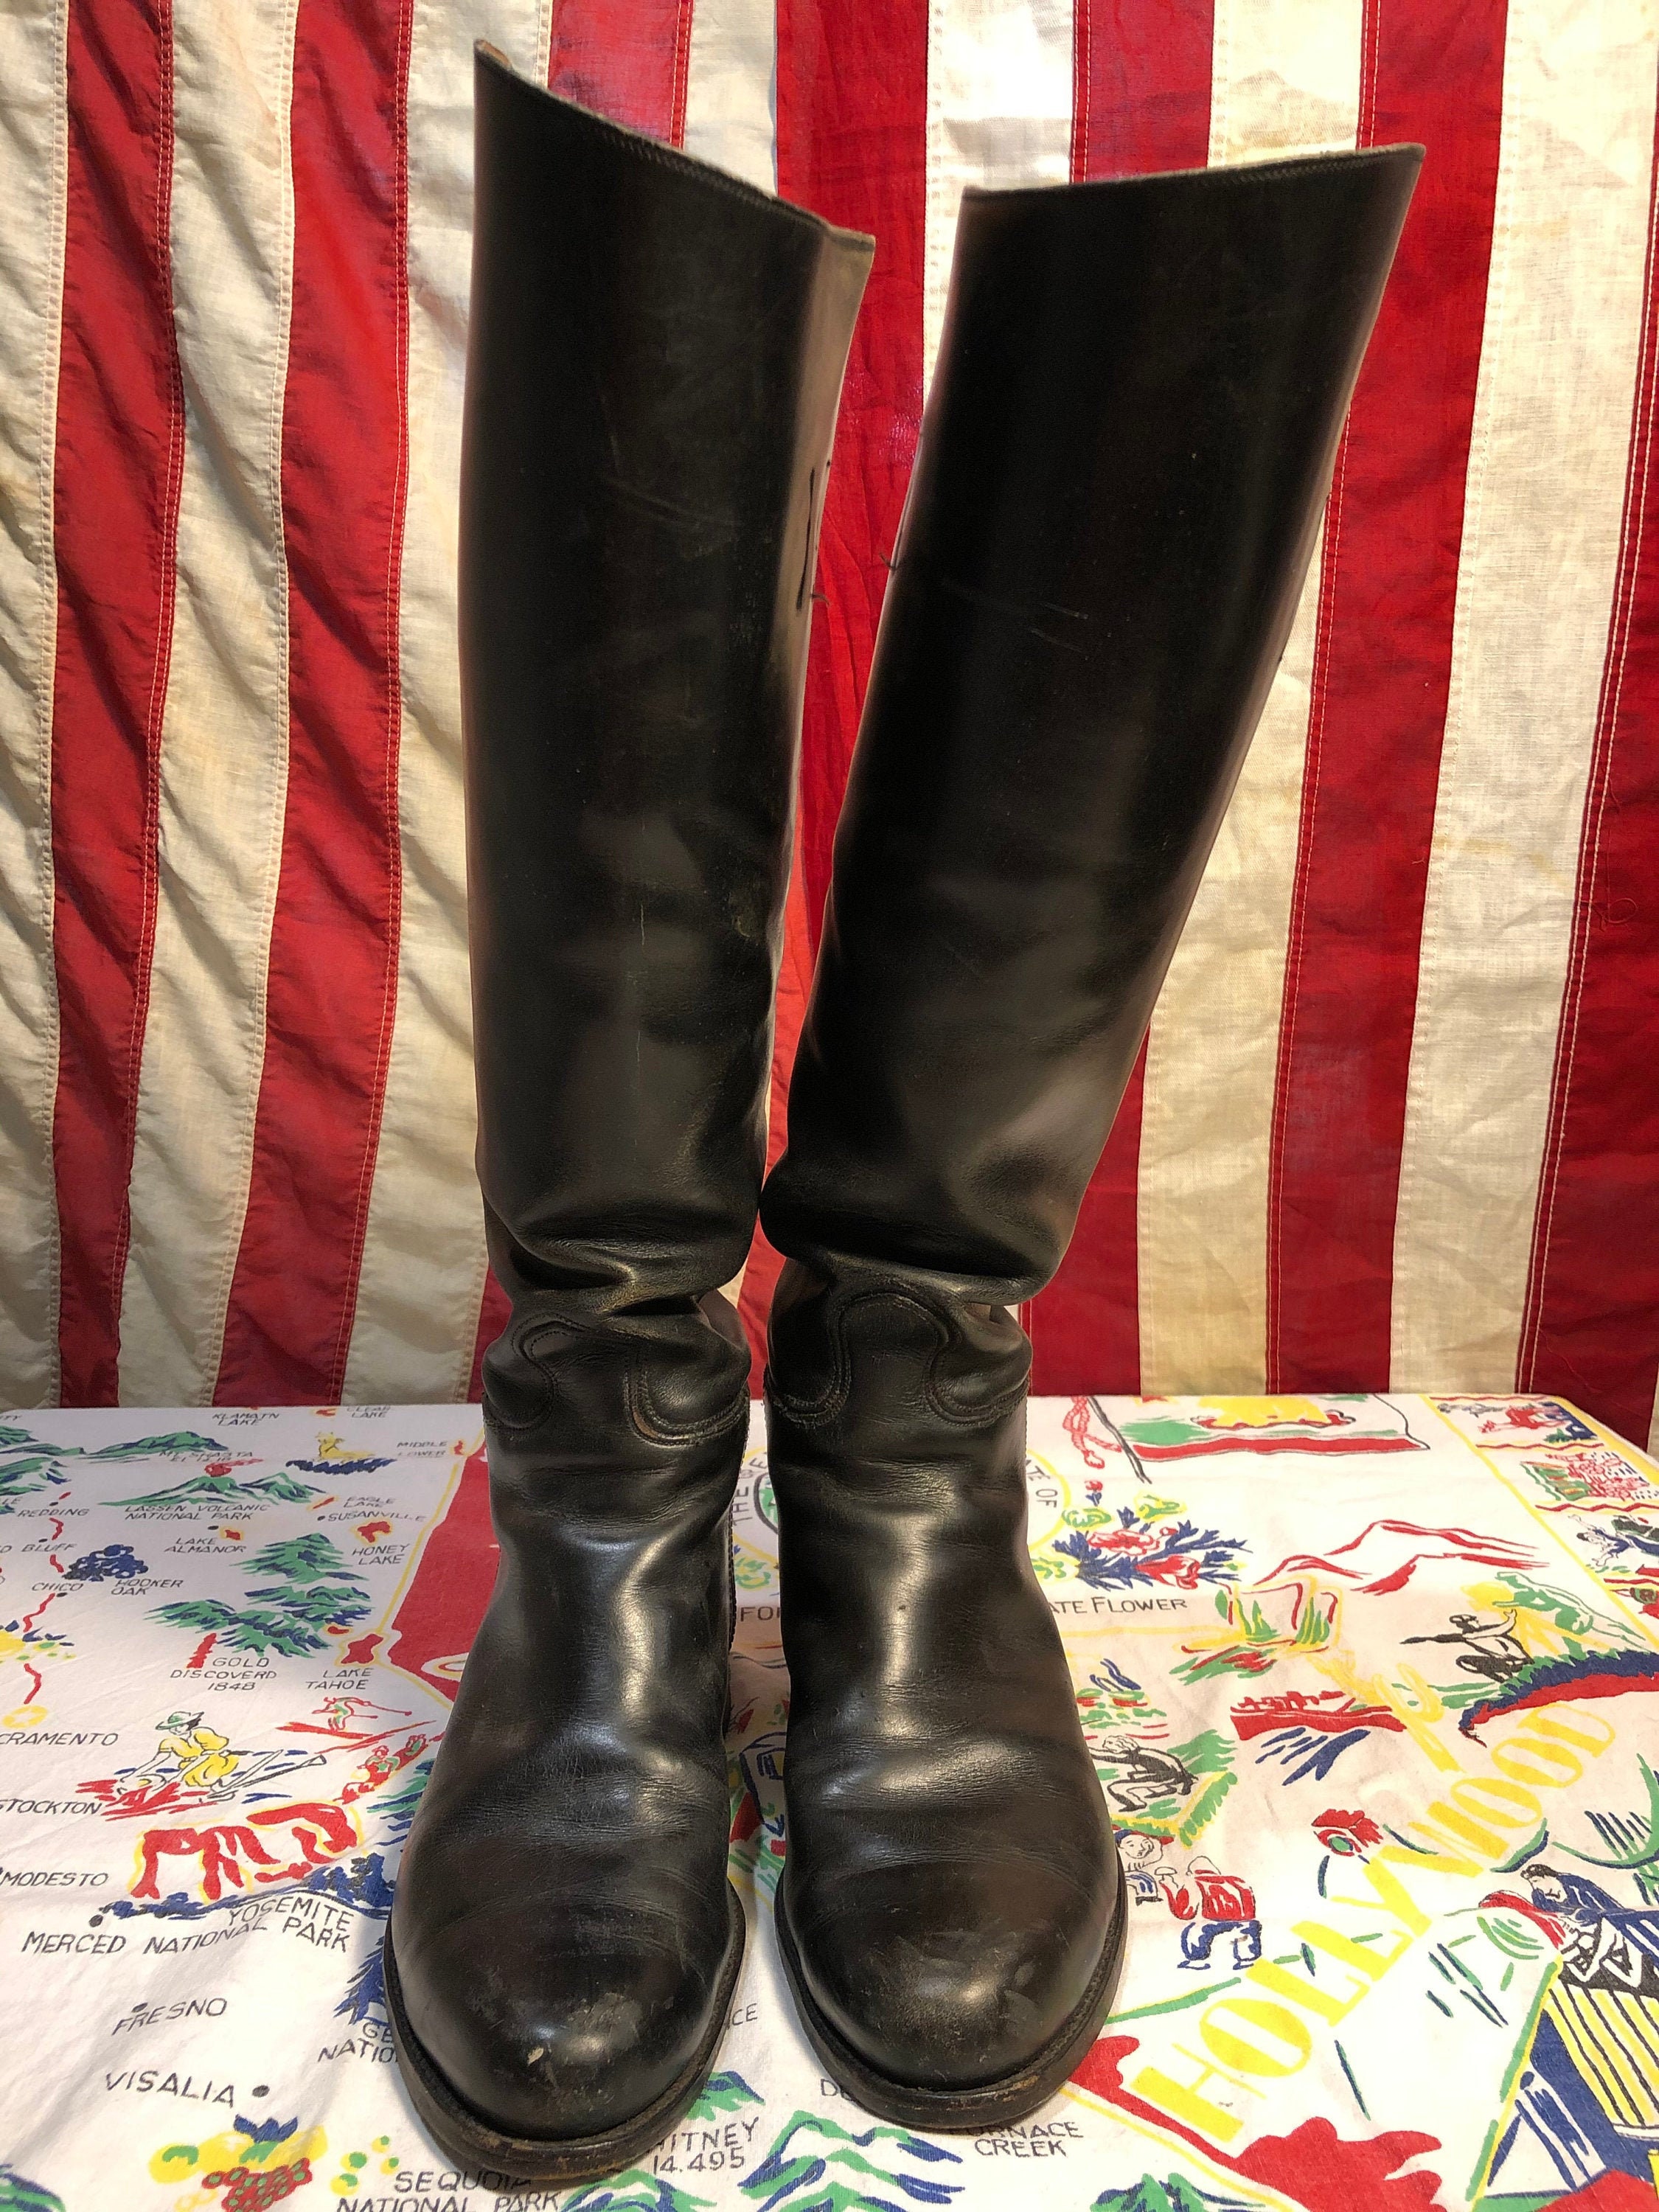 Authentic Equestrian Riding Boots 1970's 1980's Black - Etsy